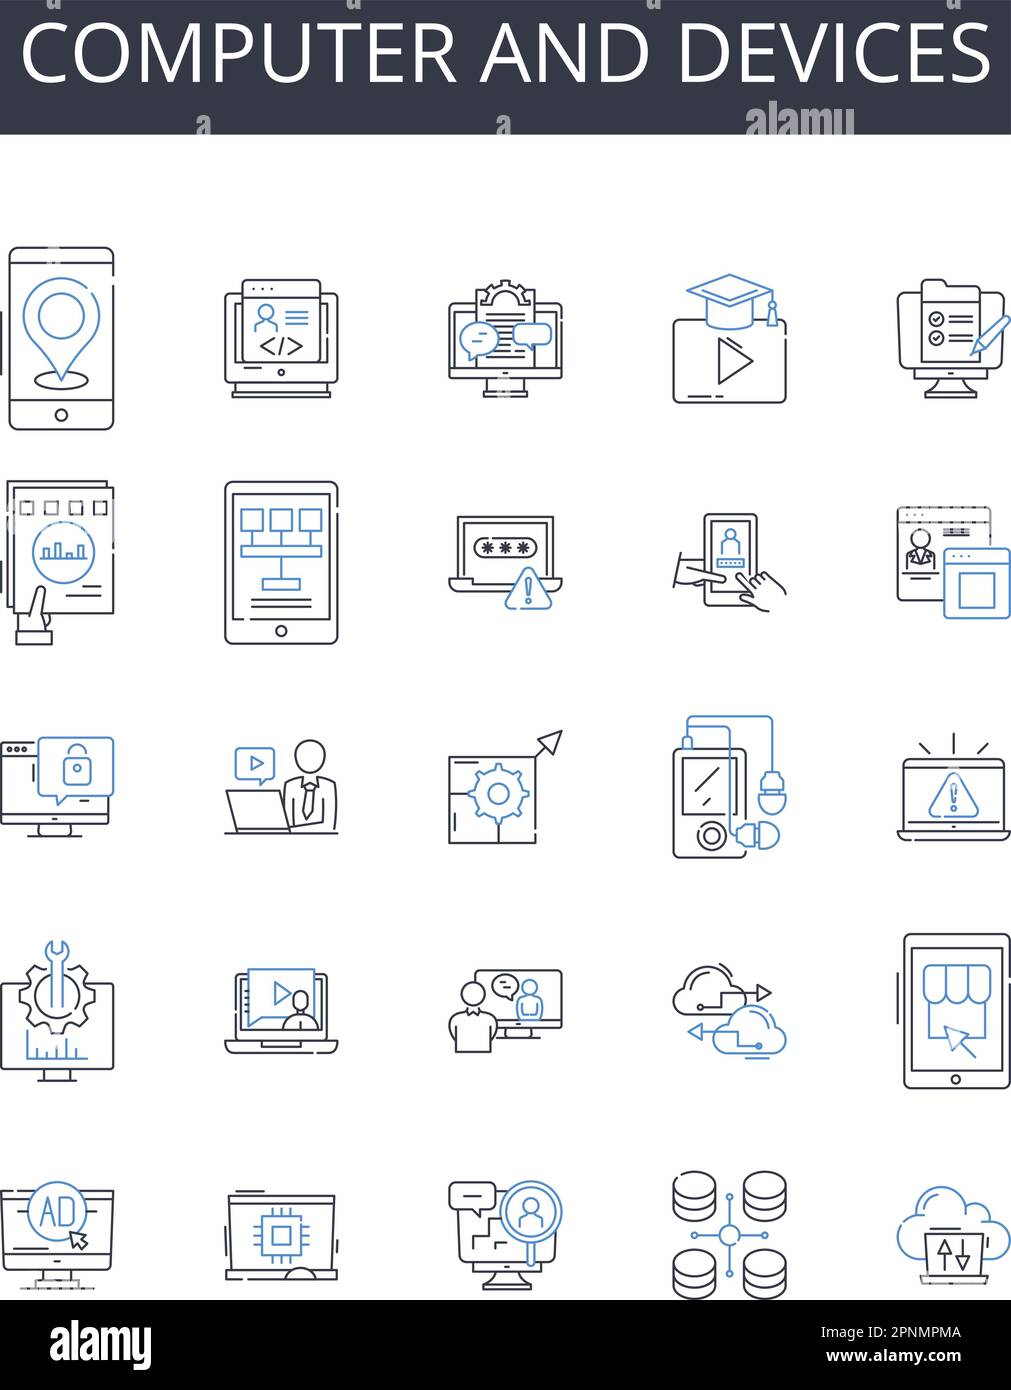 Computer and devices line icons collection. PC, laptop, tablet, smartph, smartwatch, desktop, server vector and linear illustration. gaming console Stock Vector